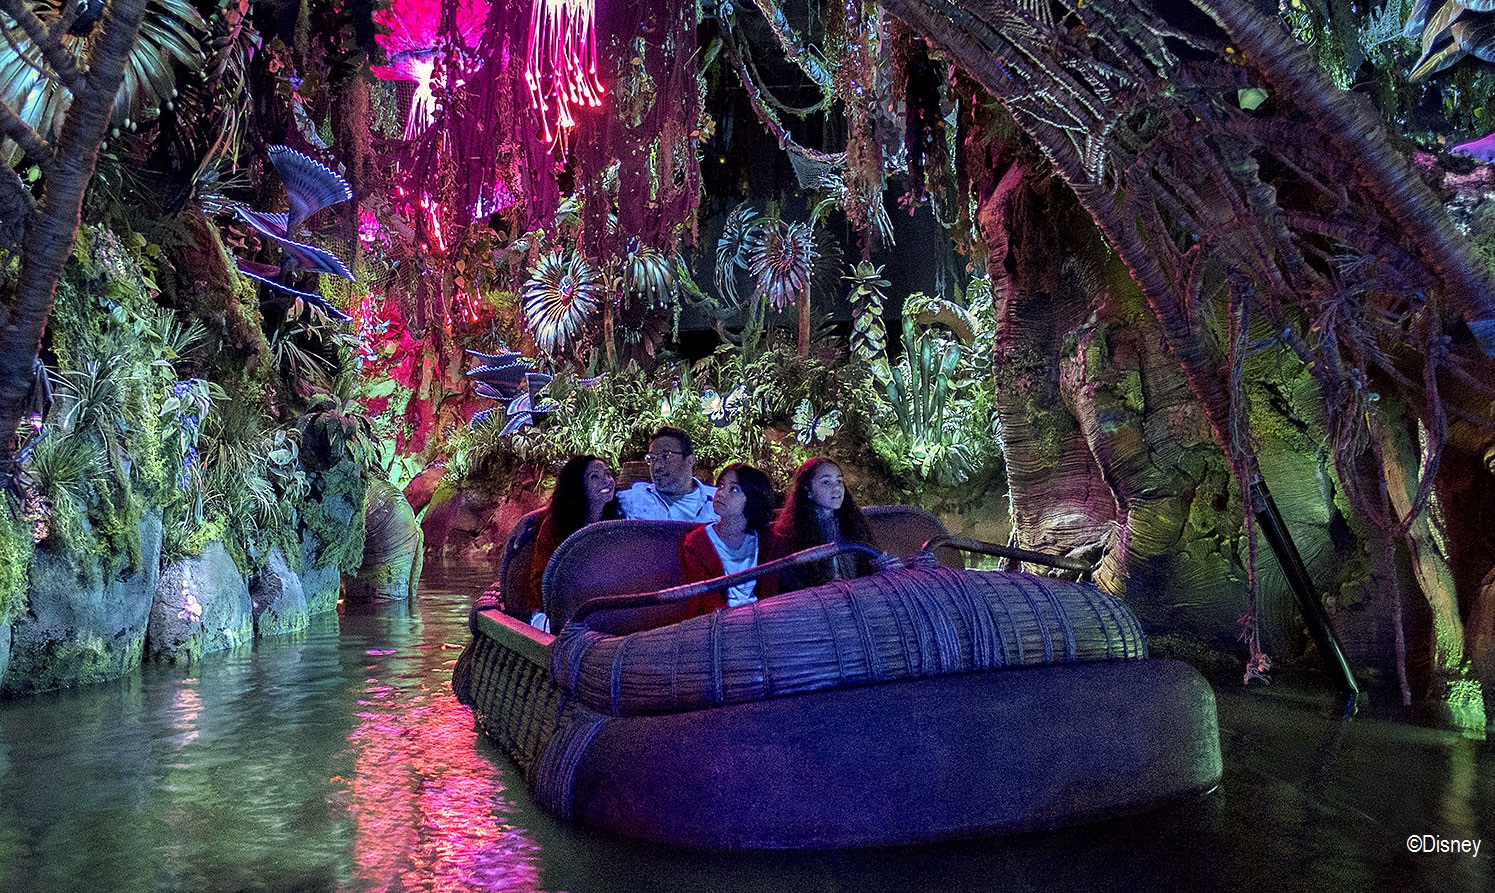 Top 5 Things To Do At Pandora The World Of Avatar Disney Springs Resort Area Hotels